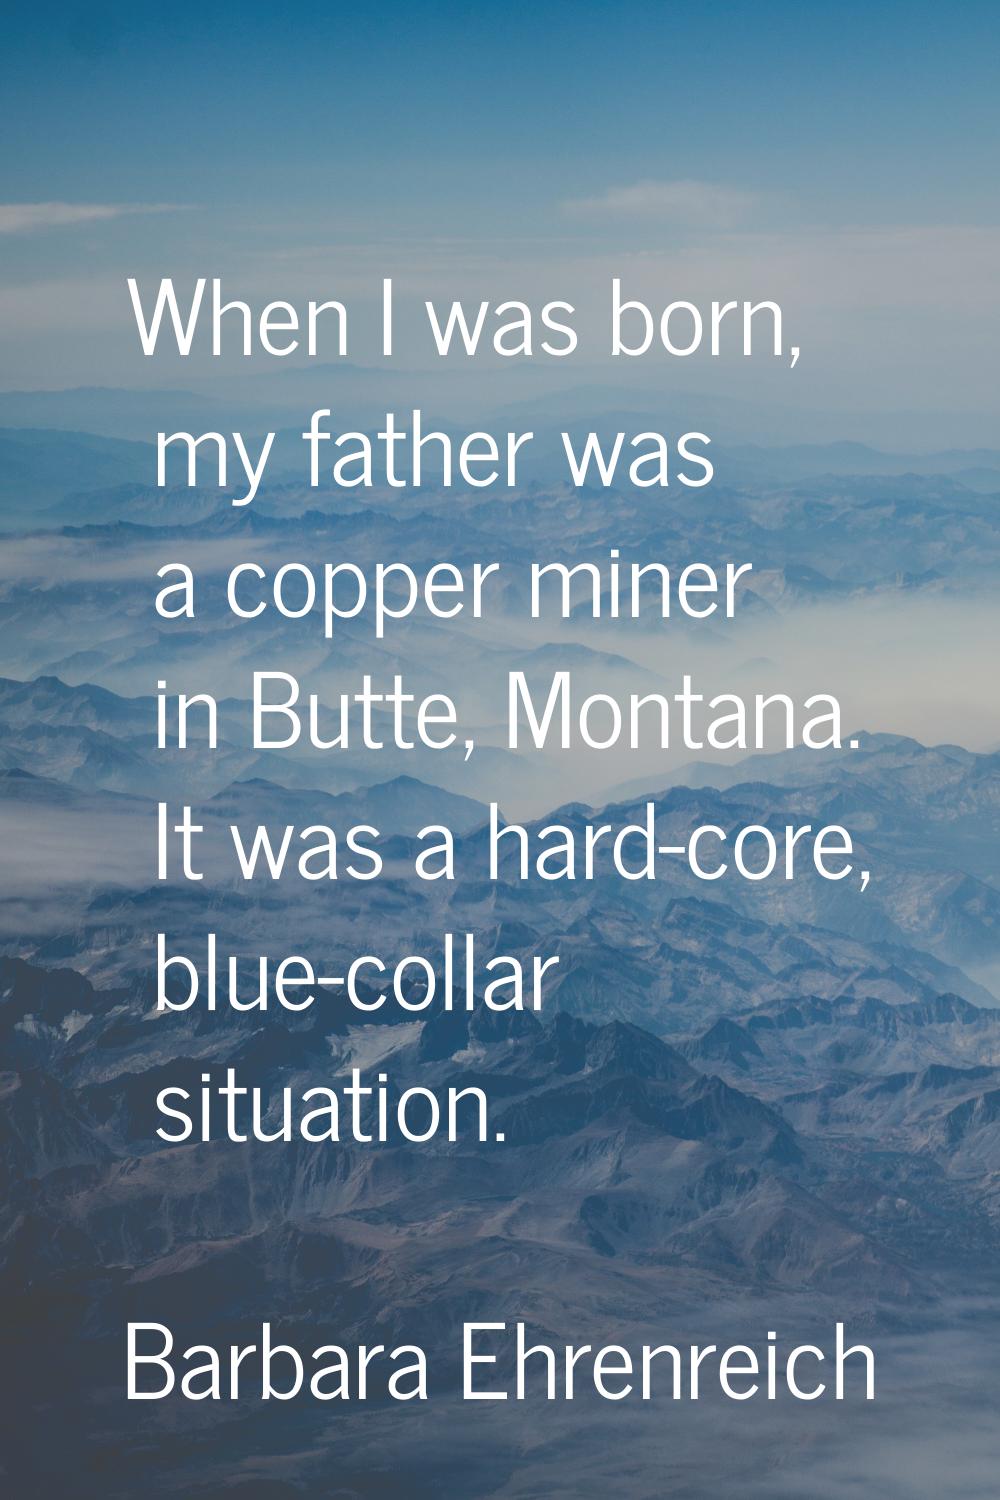 When I was born, my father was a copper miner in Butte, Montana. It was a hard-core, blue-collar si